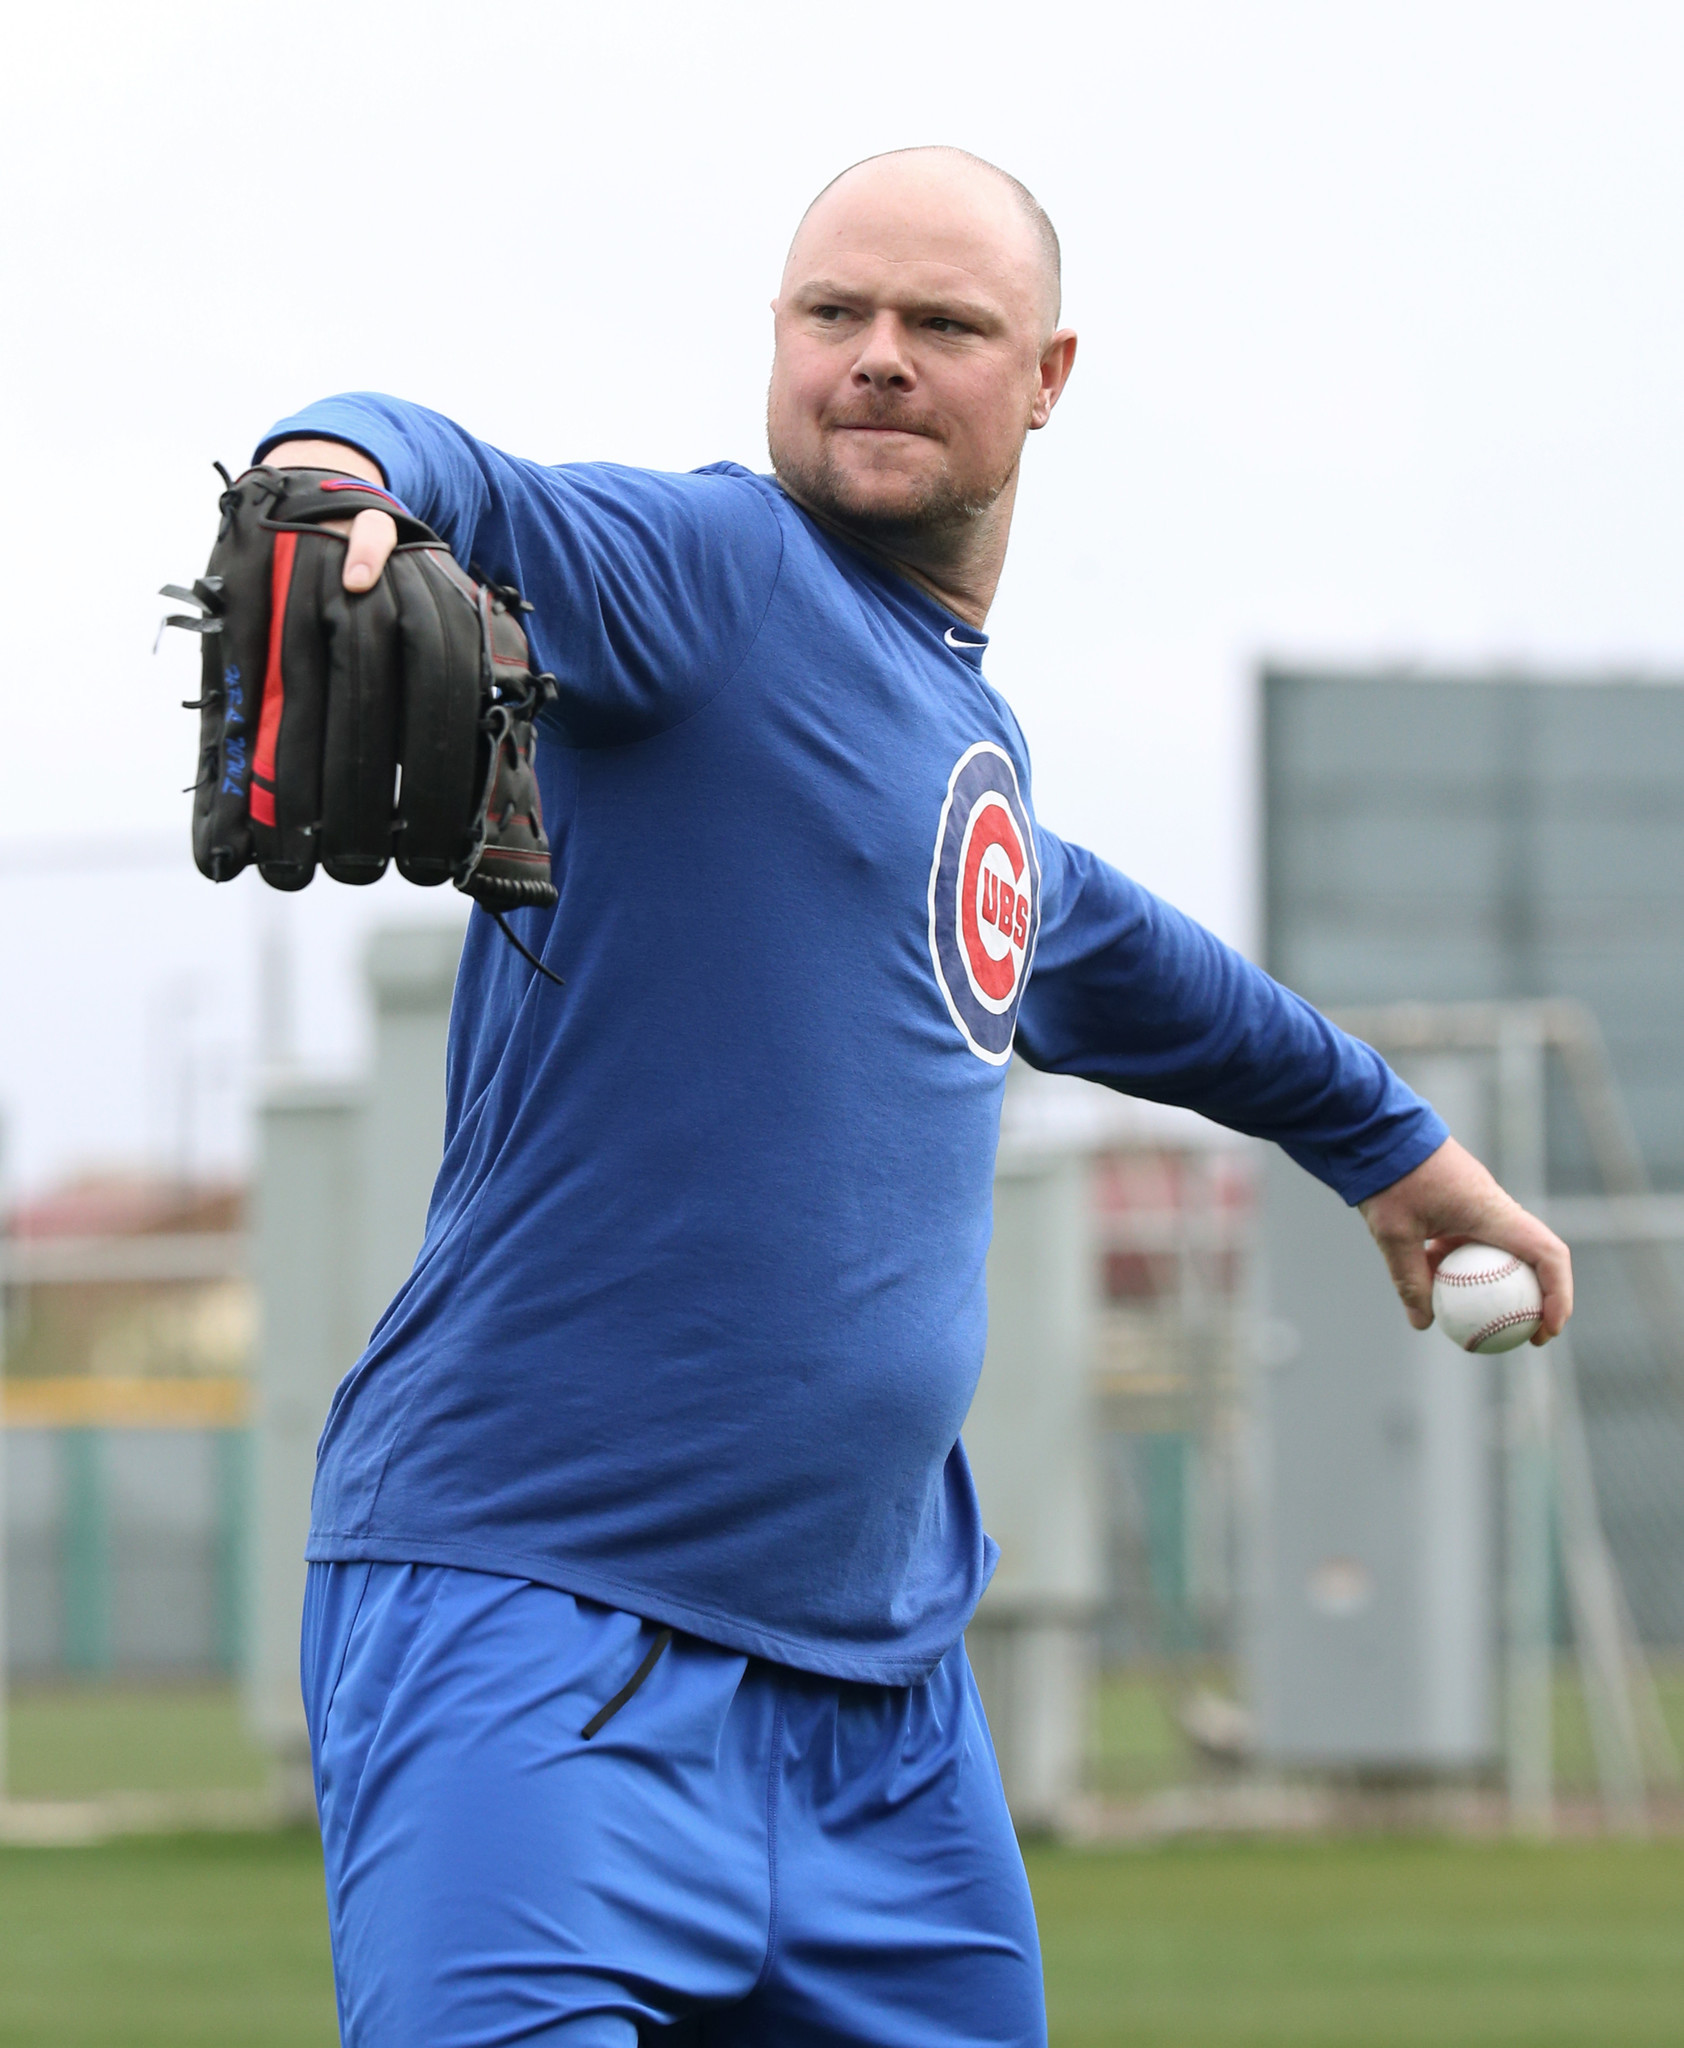 Take it easy? Jon Lester pushes himself with titles, teammates in ... - Chicago Tribune